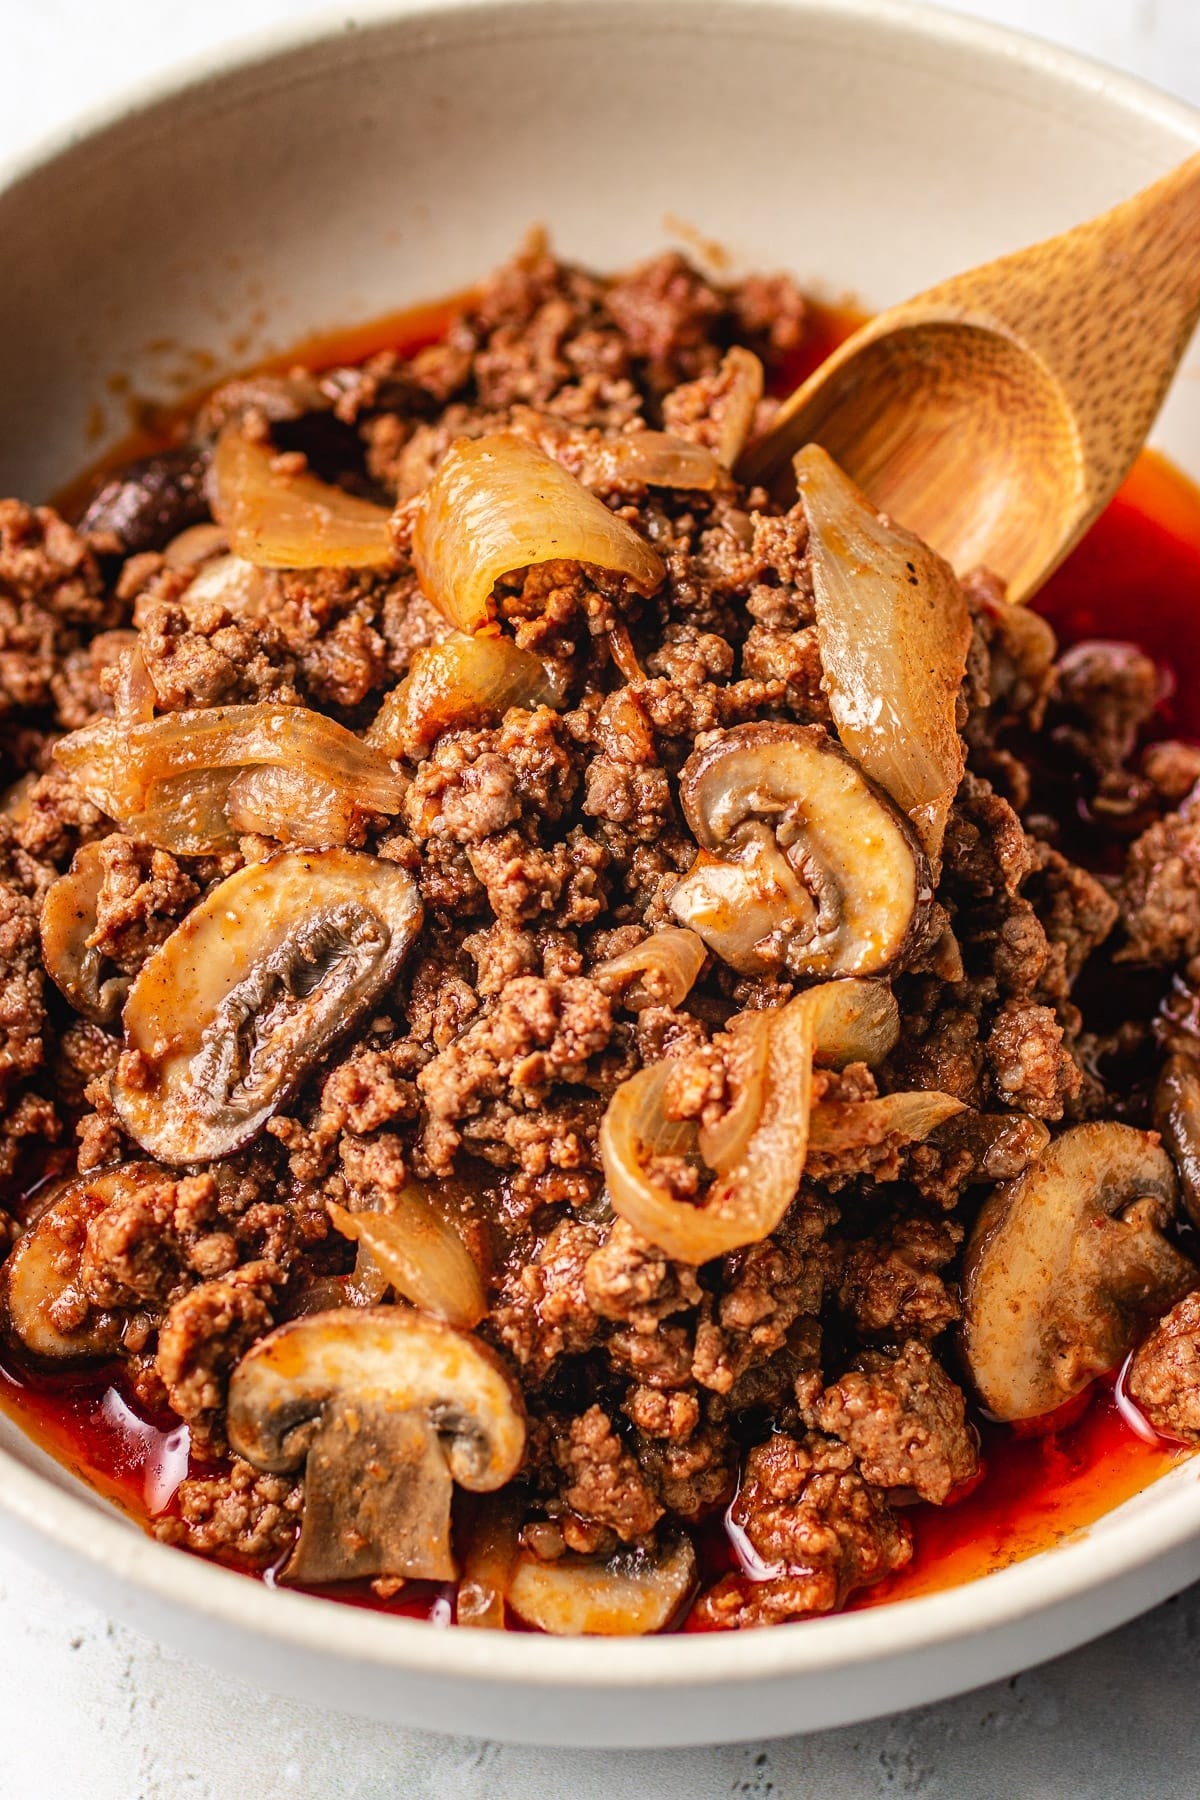 Keto ground beef with mushrooms and onions mixed in